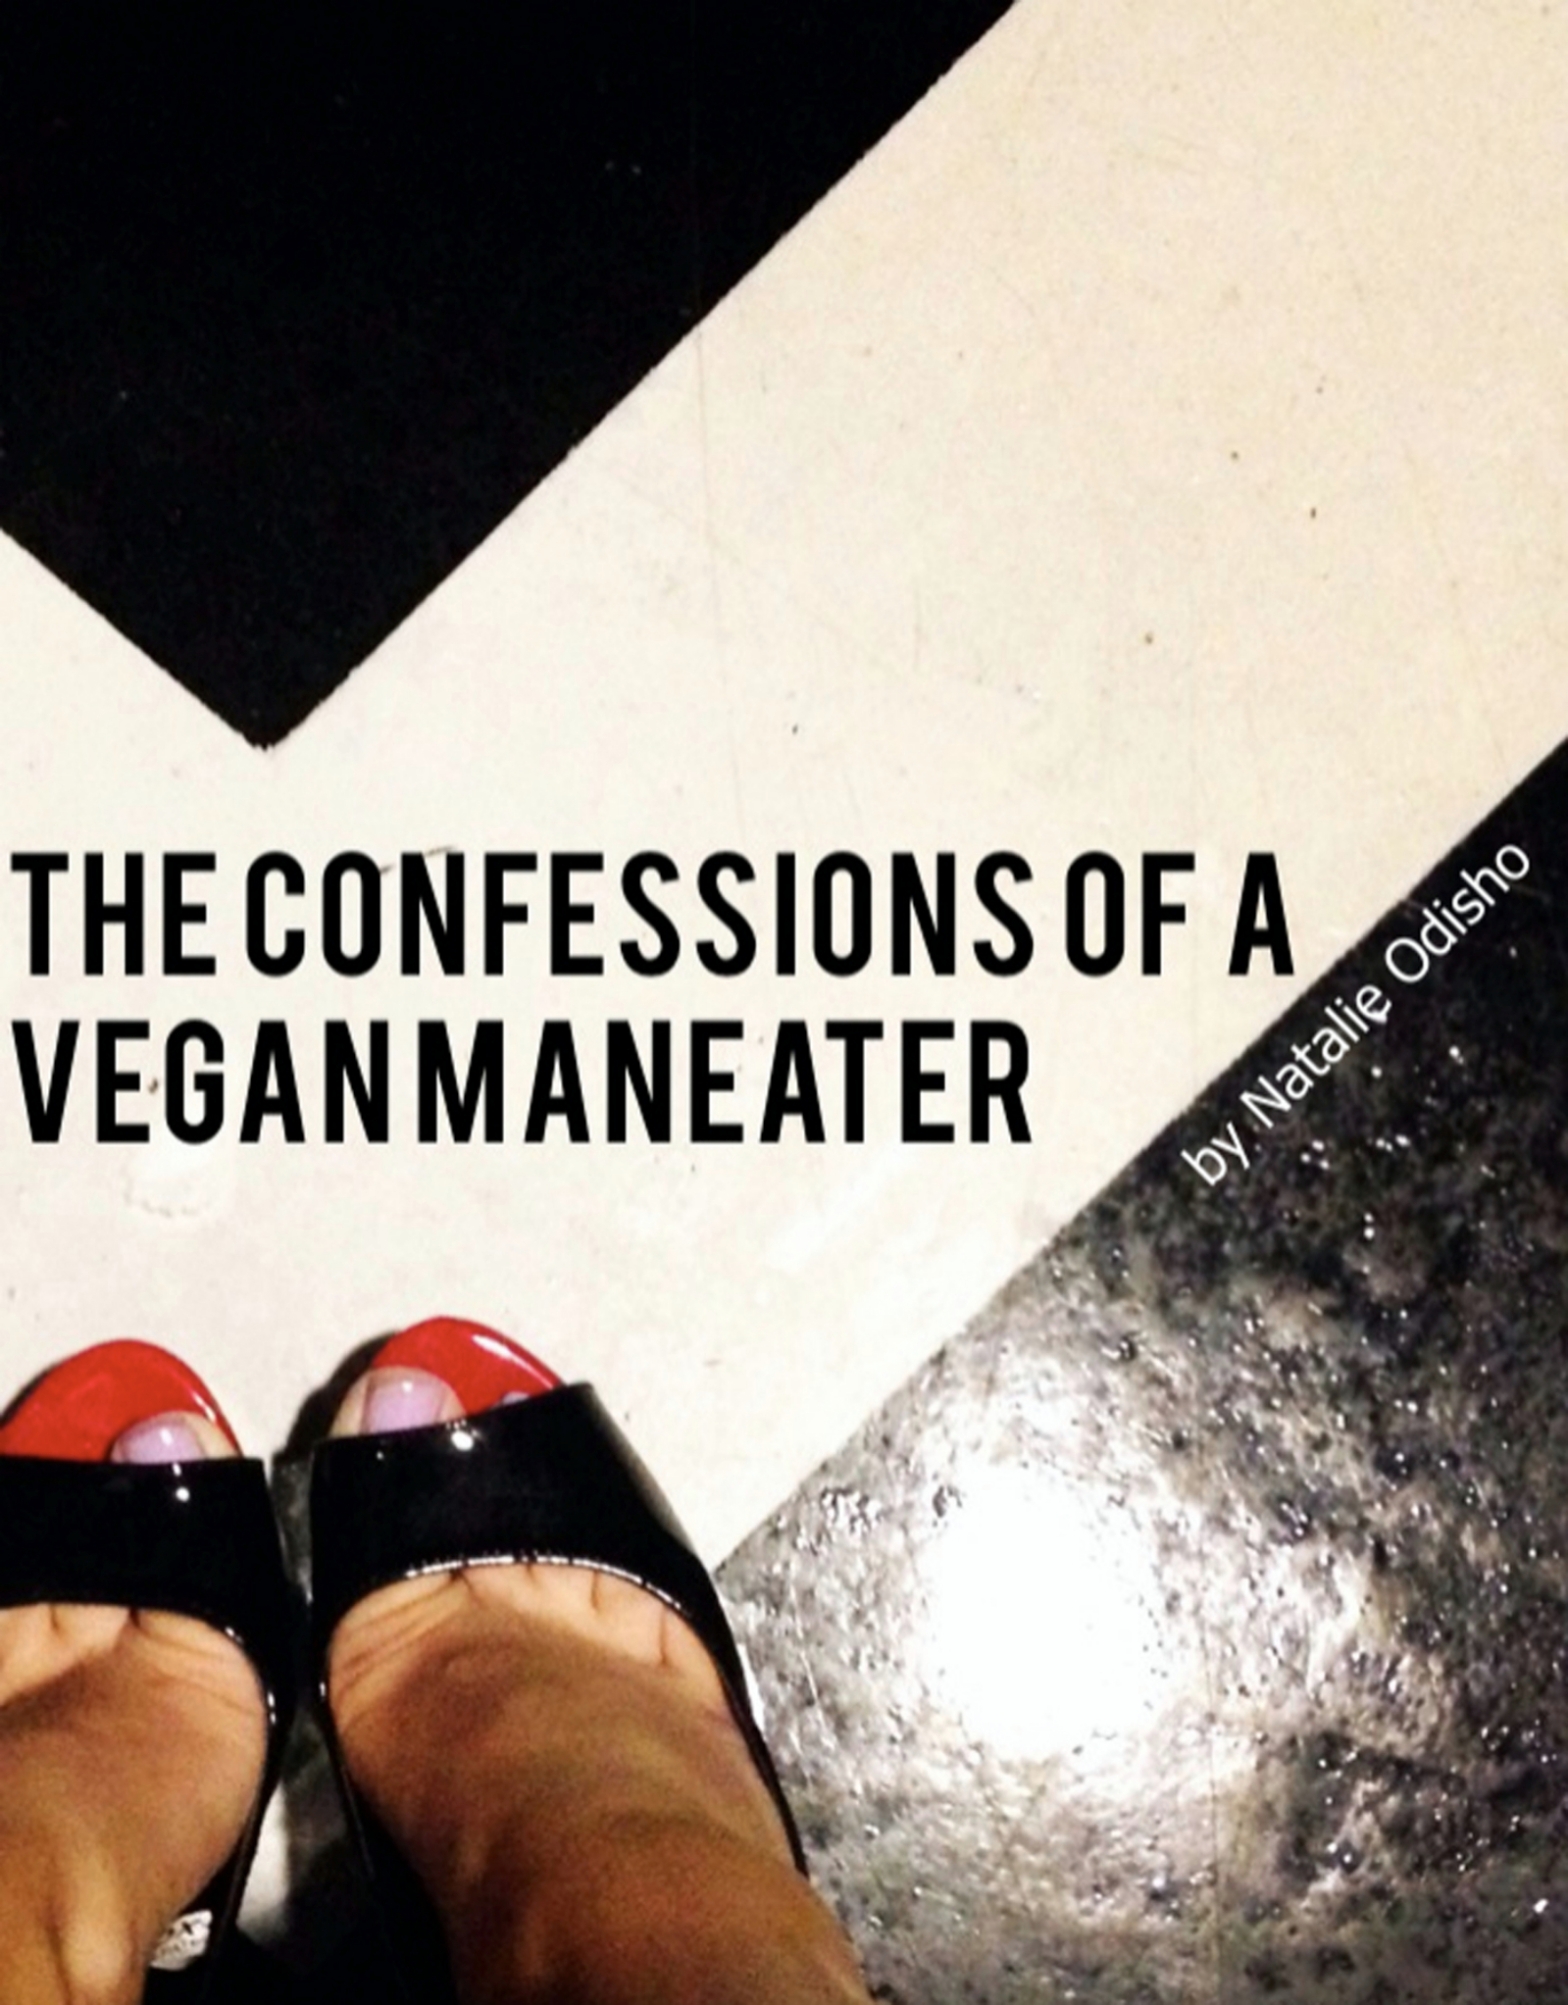 Black Patent Leather from the floors of Mingo karaoke. The Confessions of a Vegan Maneater